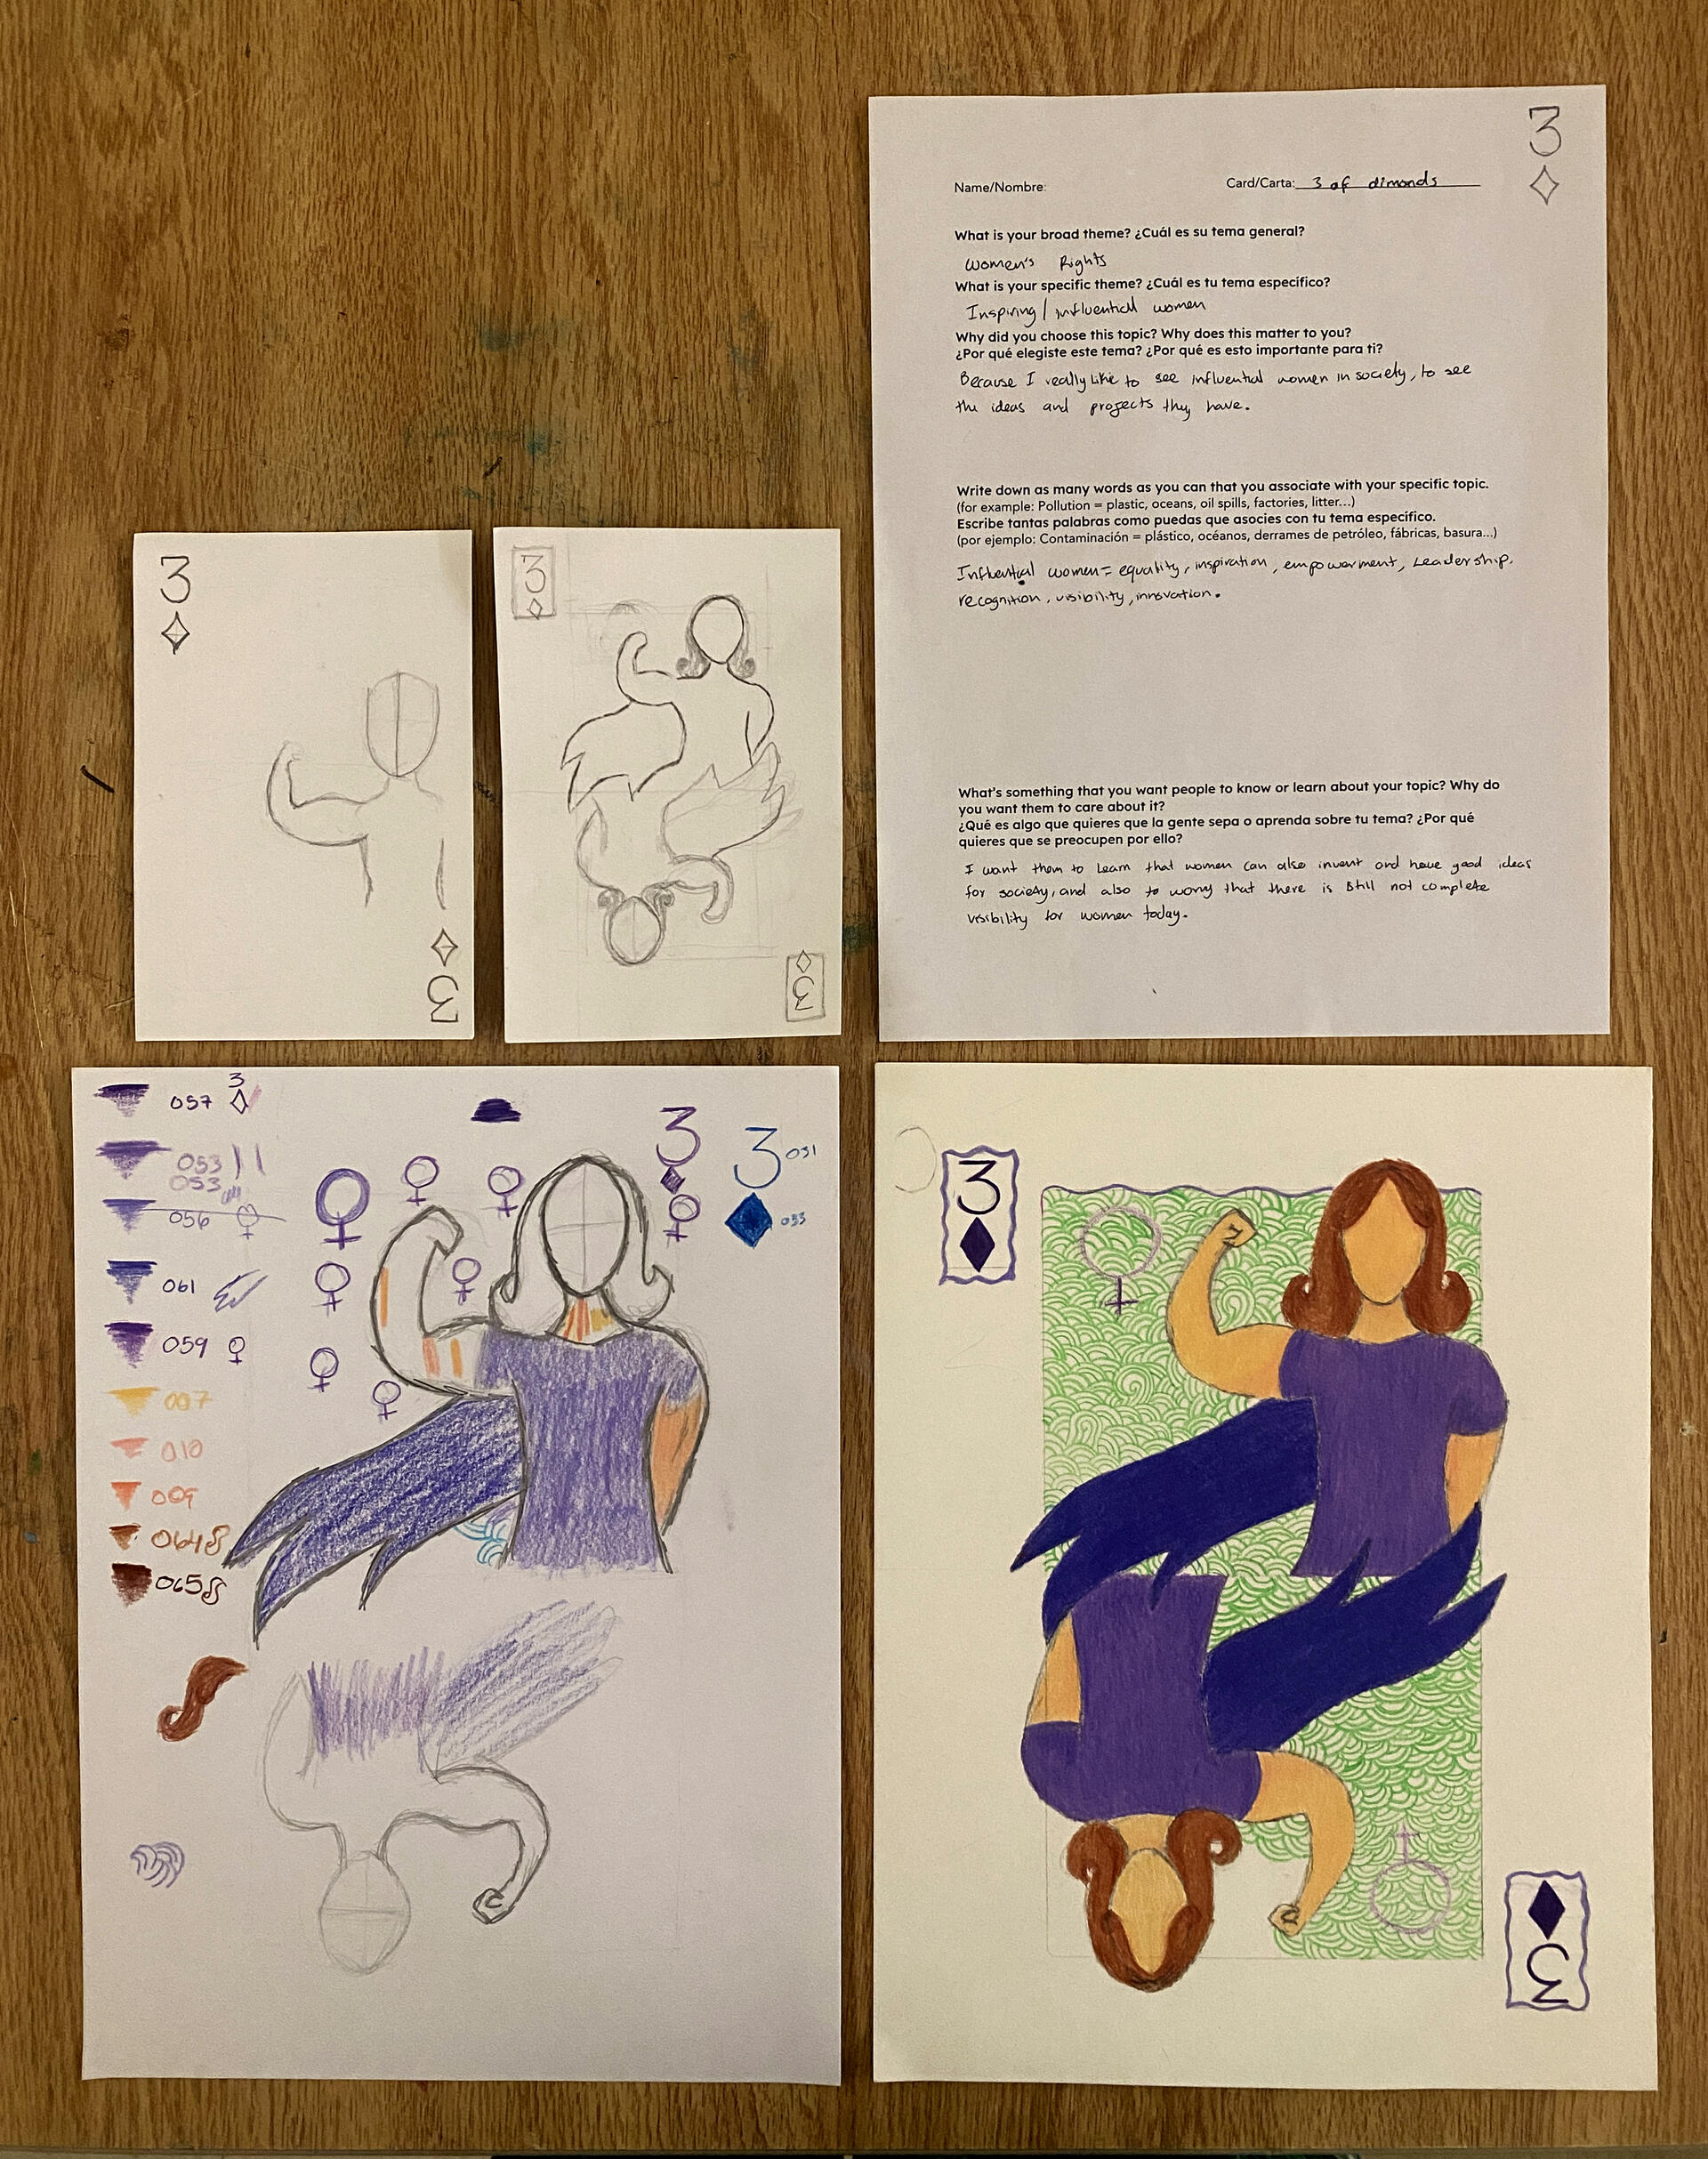 Papers counter-clockwise from top right: guided brainstorming sheet, rough sketches on index cards, testing colors, and final illustration featuring a diagonally symmetrical drawing of a woman flexing her bicep.